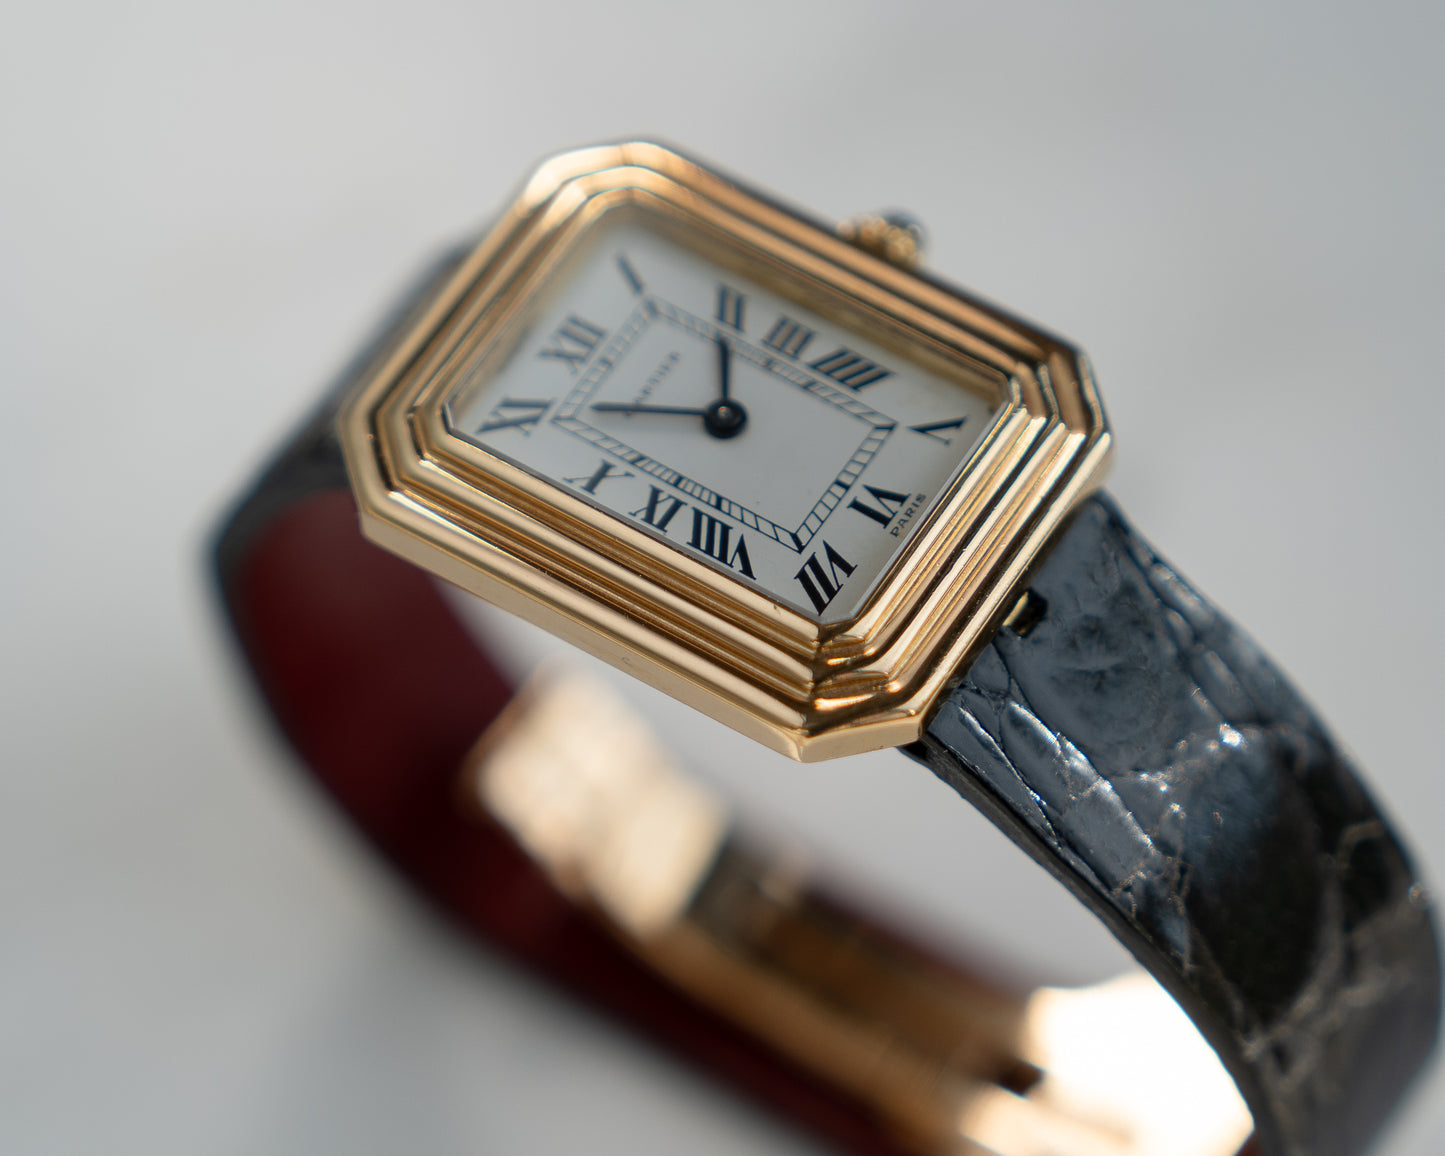 Cartier Cristallor 18k Yellow Gold, early Paris Dial and hidden lug case, SM size with 18k gold deployant buckle